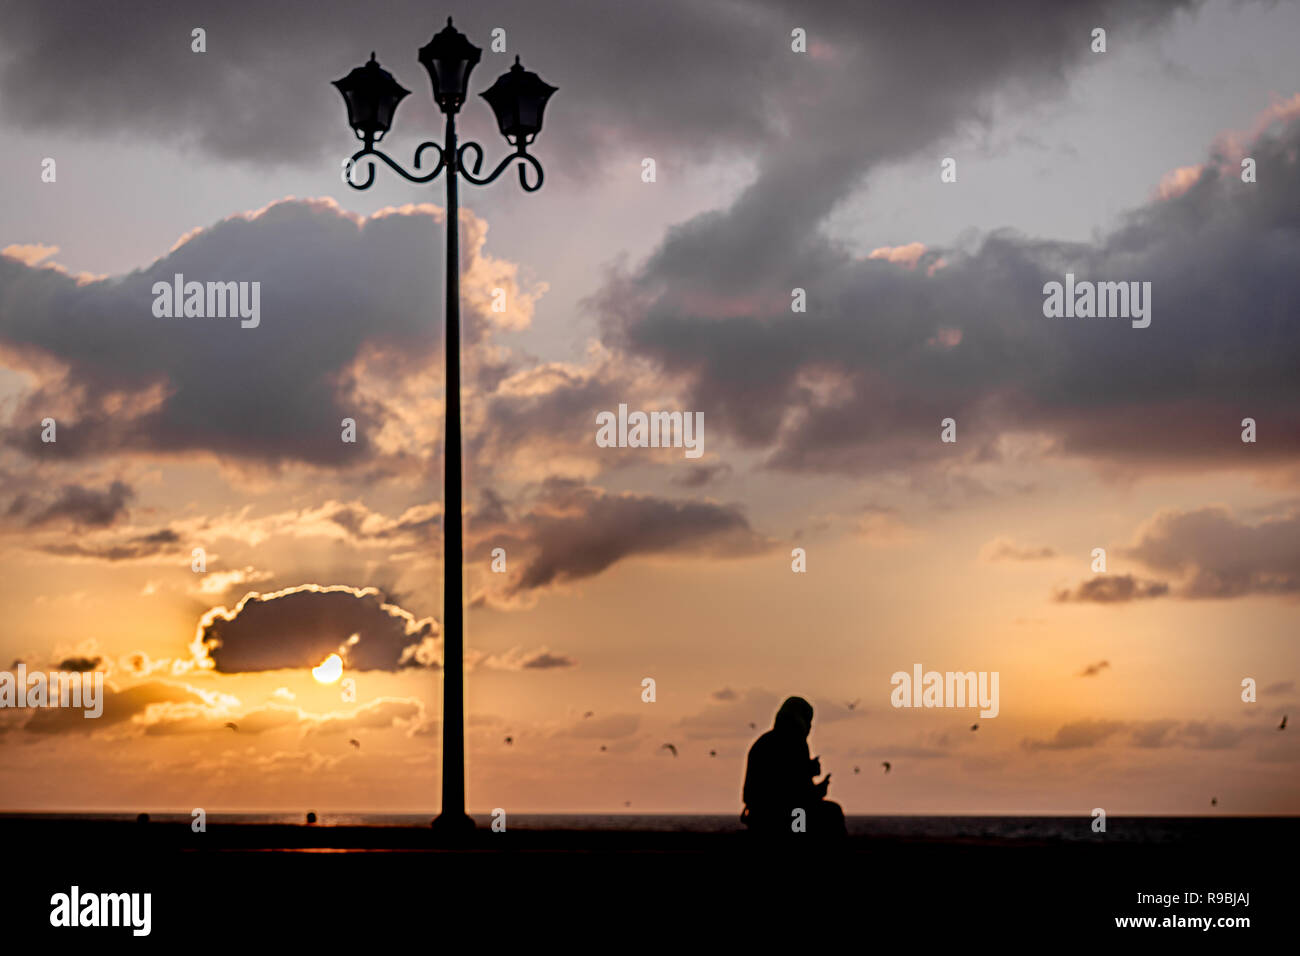 Loneliness Silhouette conceptual shot ,sunset and shadows Stock Photo